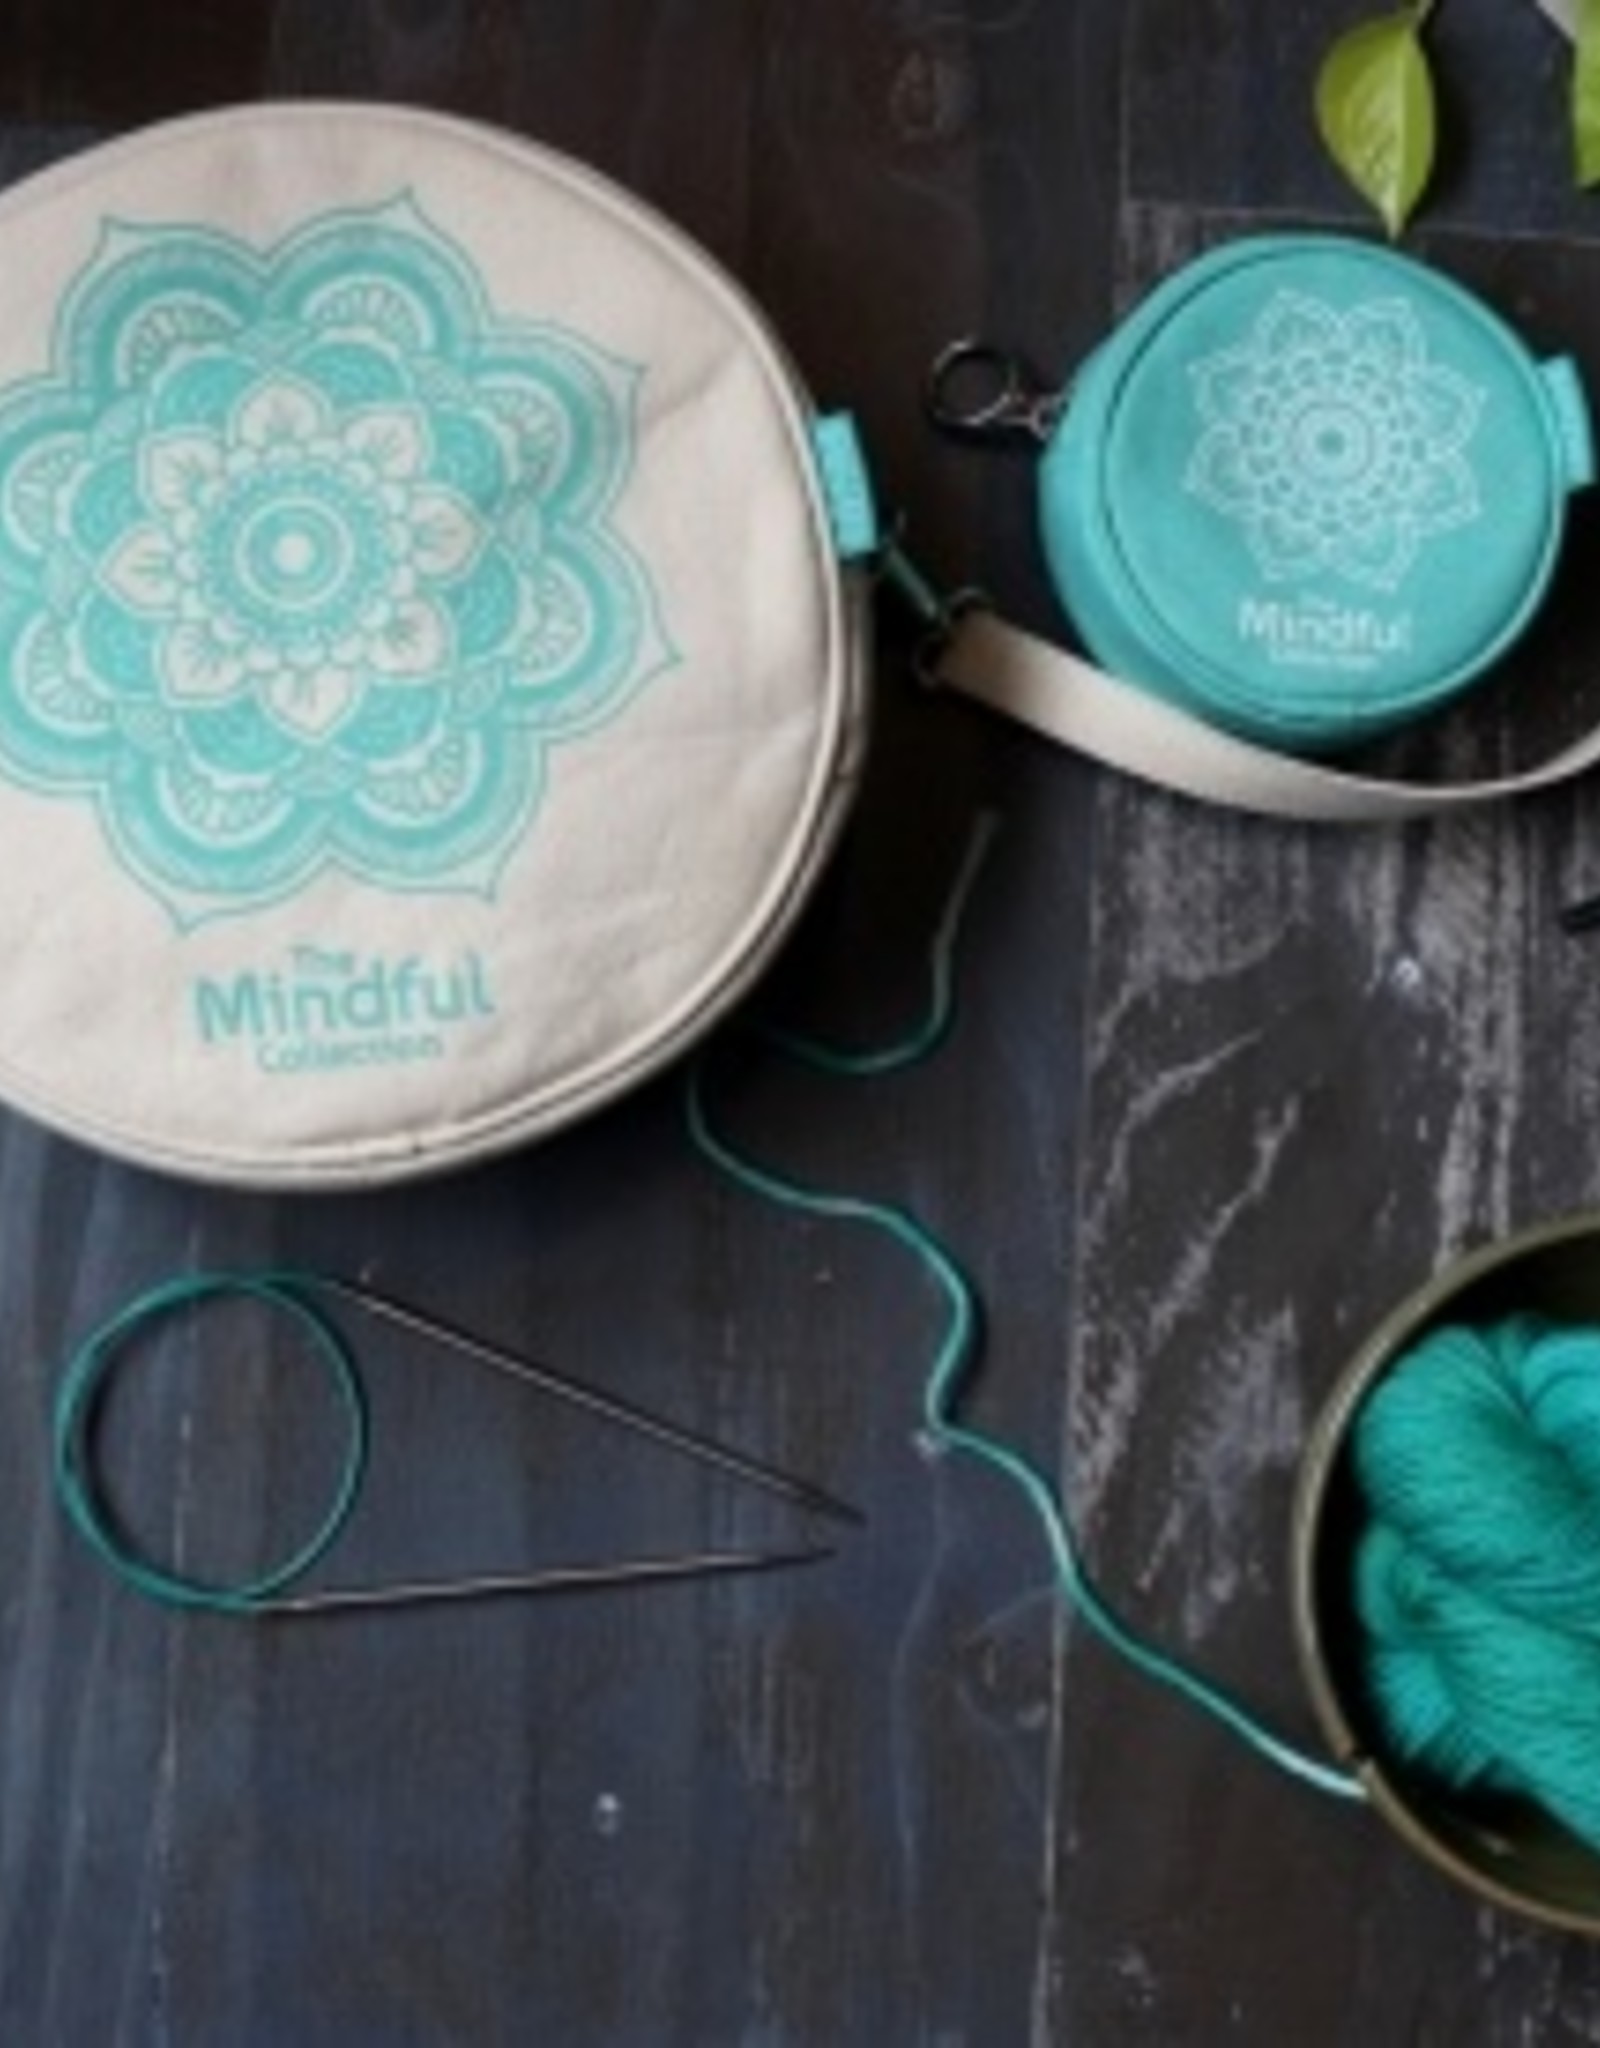 Knitters Pride KP Mindful Collection Twin Circular Bags